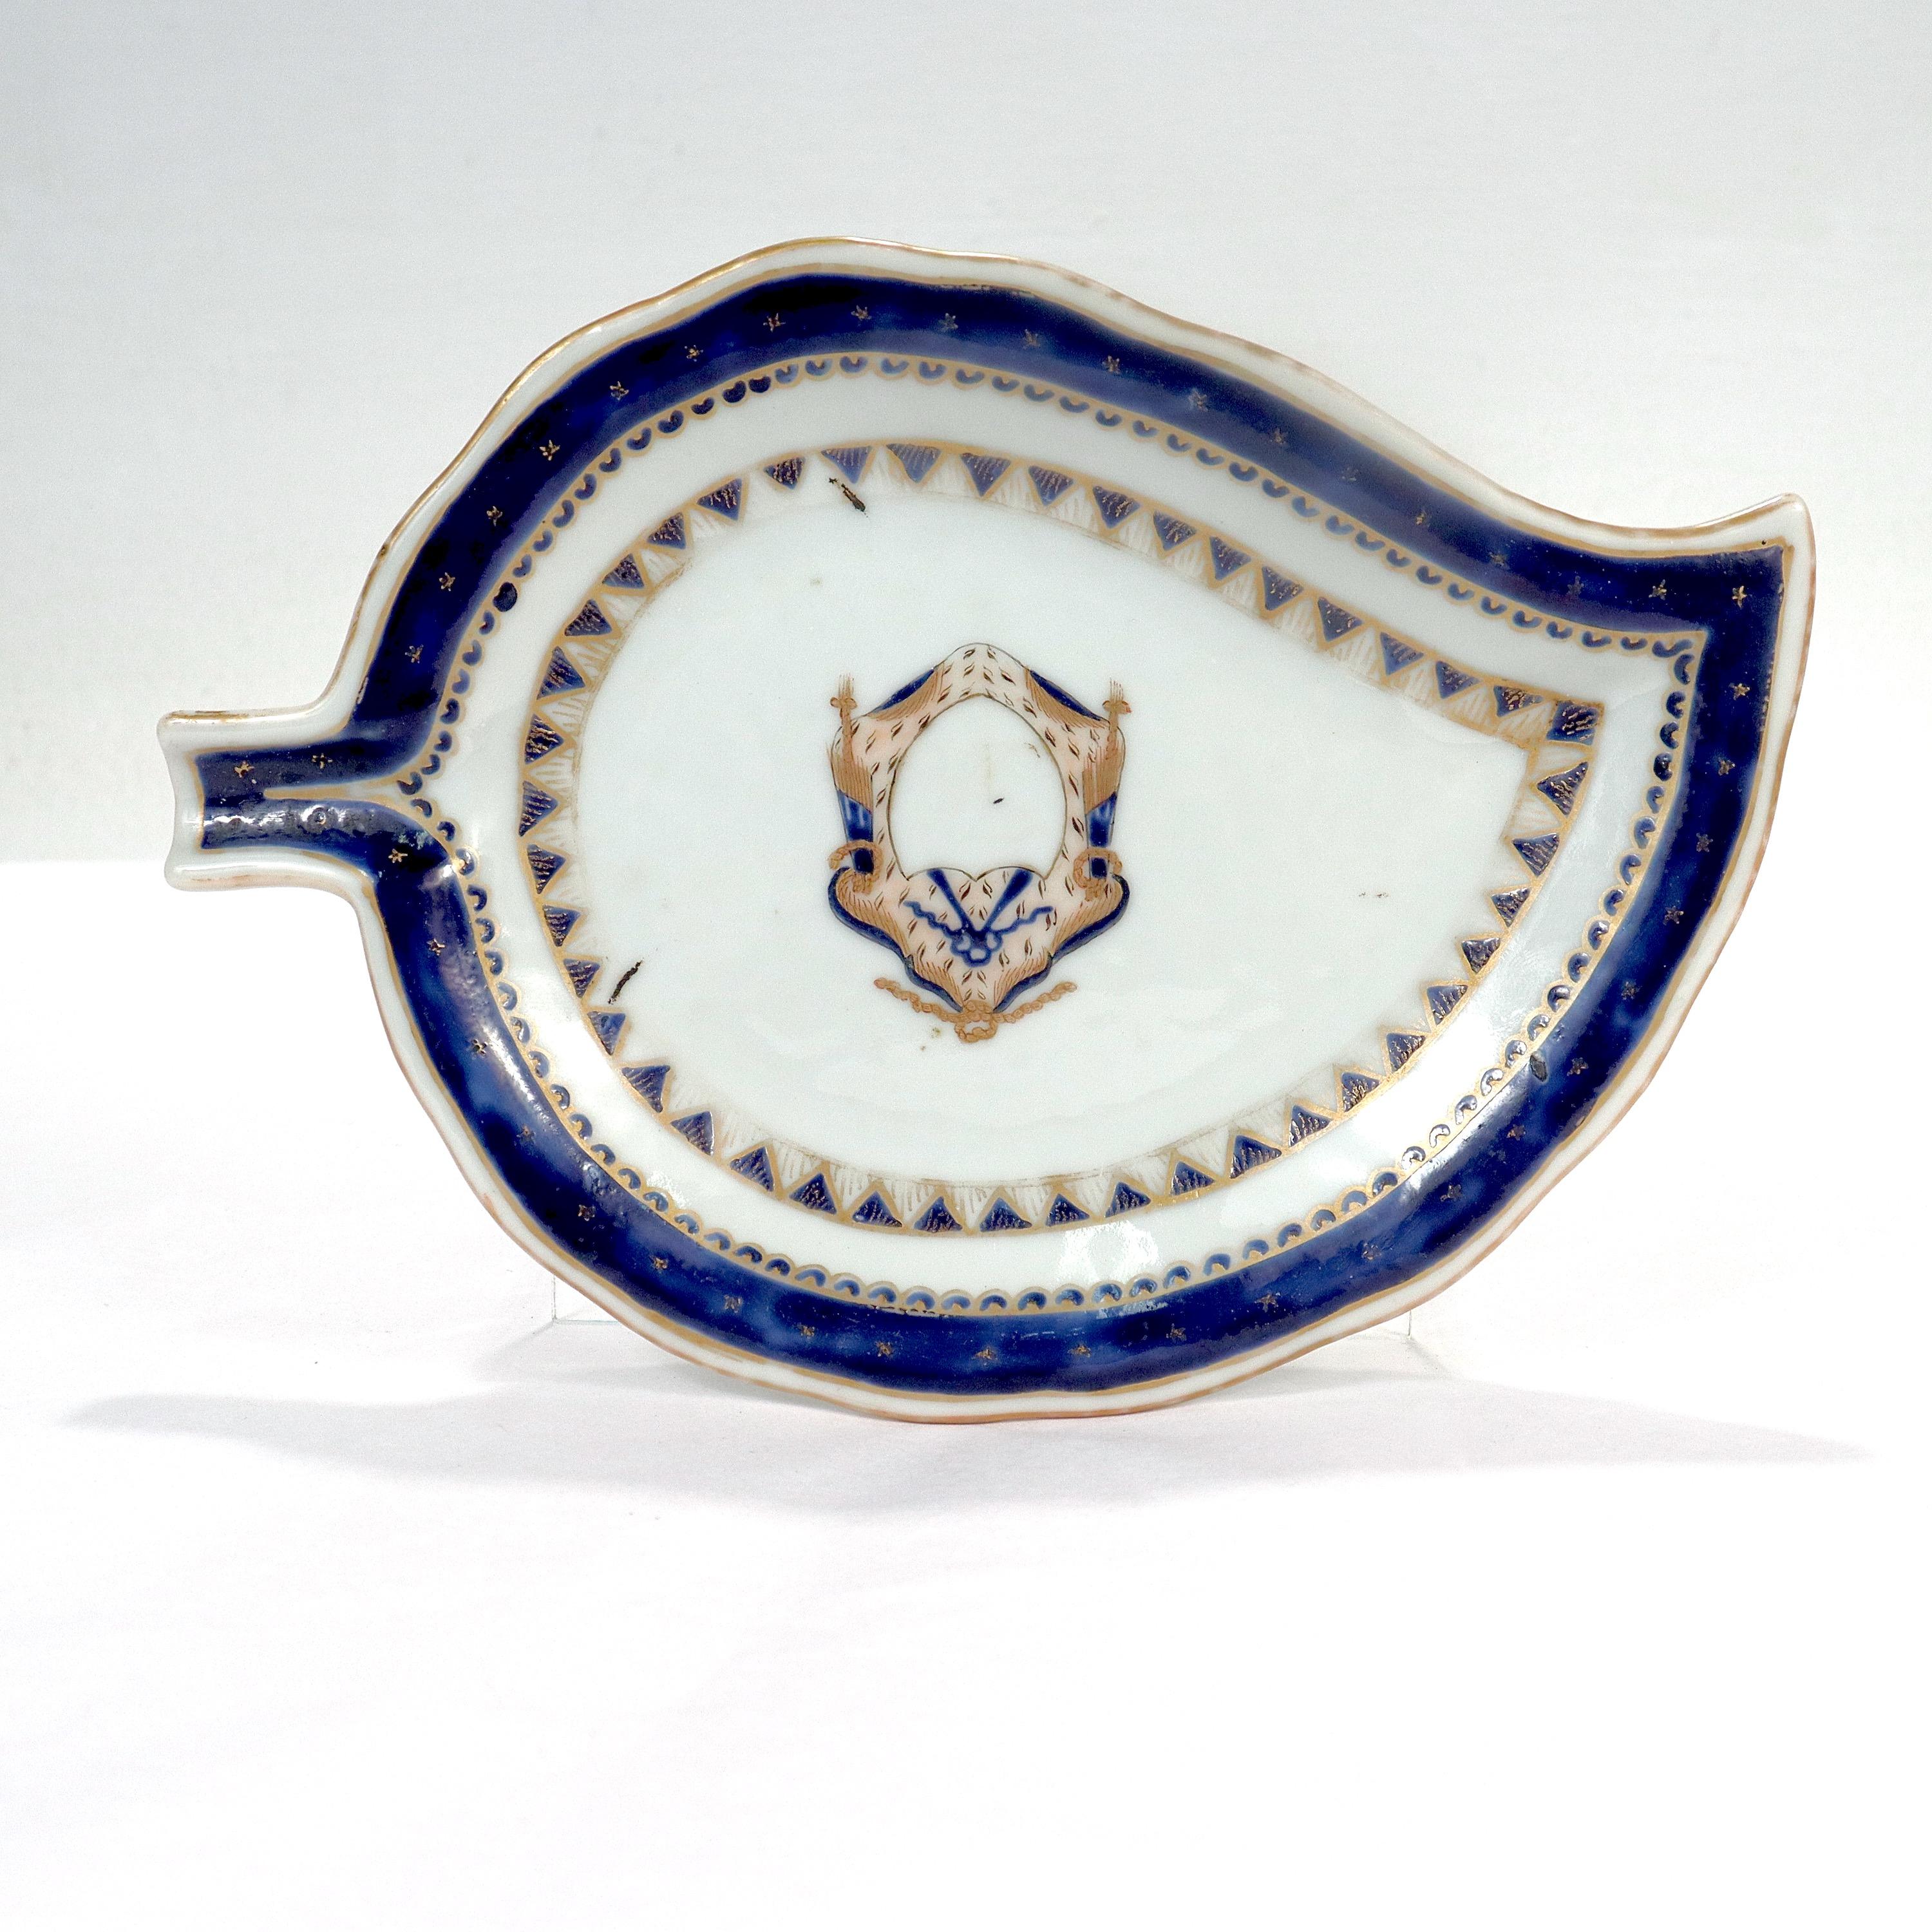 Old or Antique Chinese Export Porcelain Armorial Tobacco Leaf Form Dish / Plate In Good Condition For Sale In Philadelphia, PA